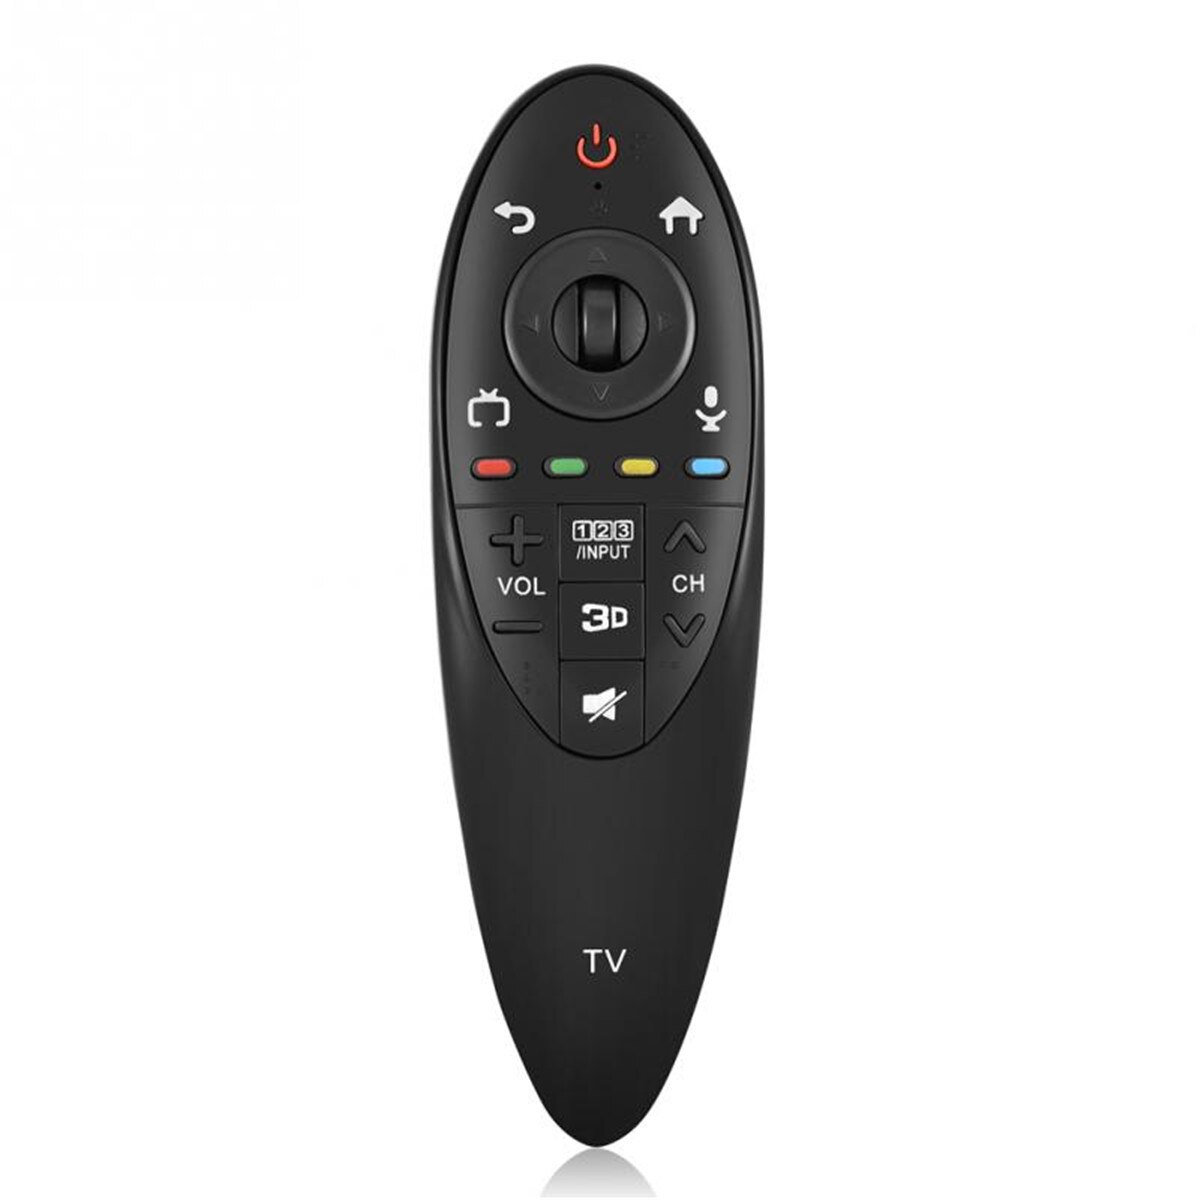 Remote Control Replace For LG 3D Smart TV AN-MR500G AN-MR500 MBM63935937